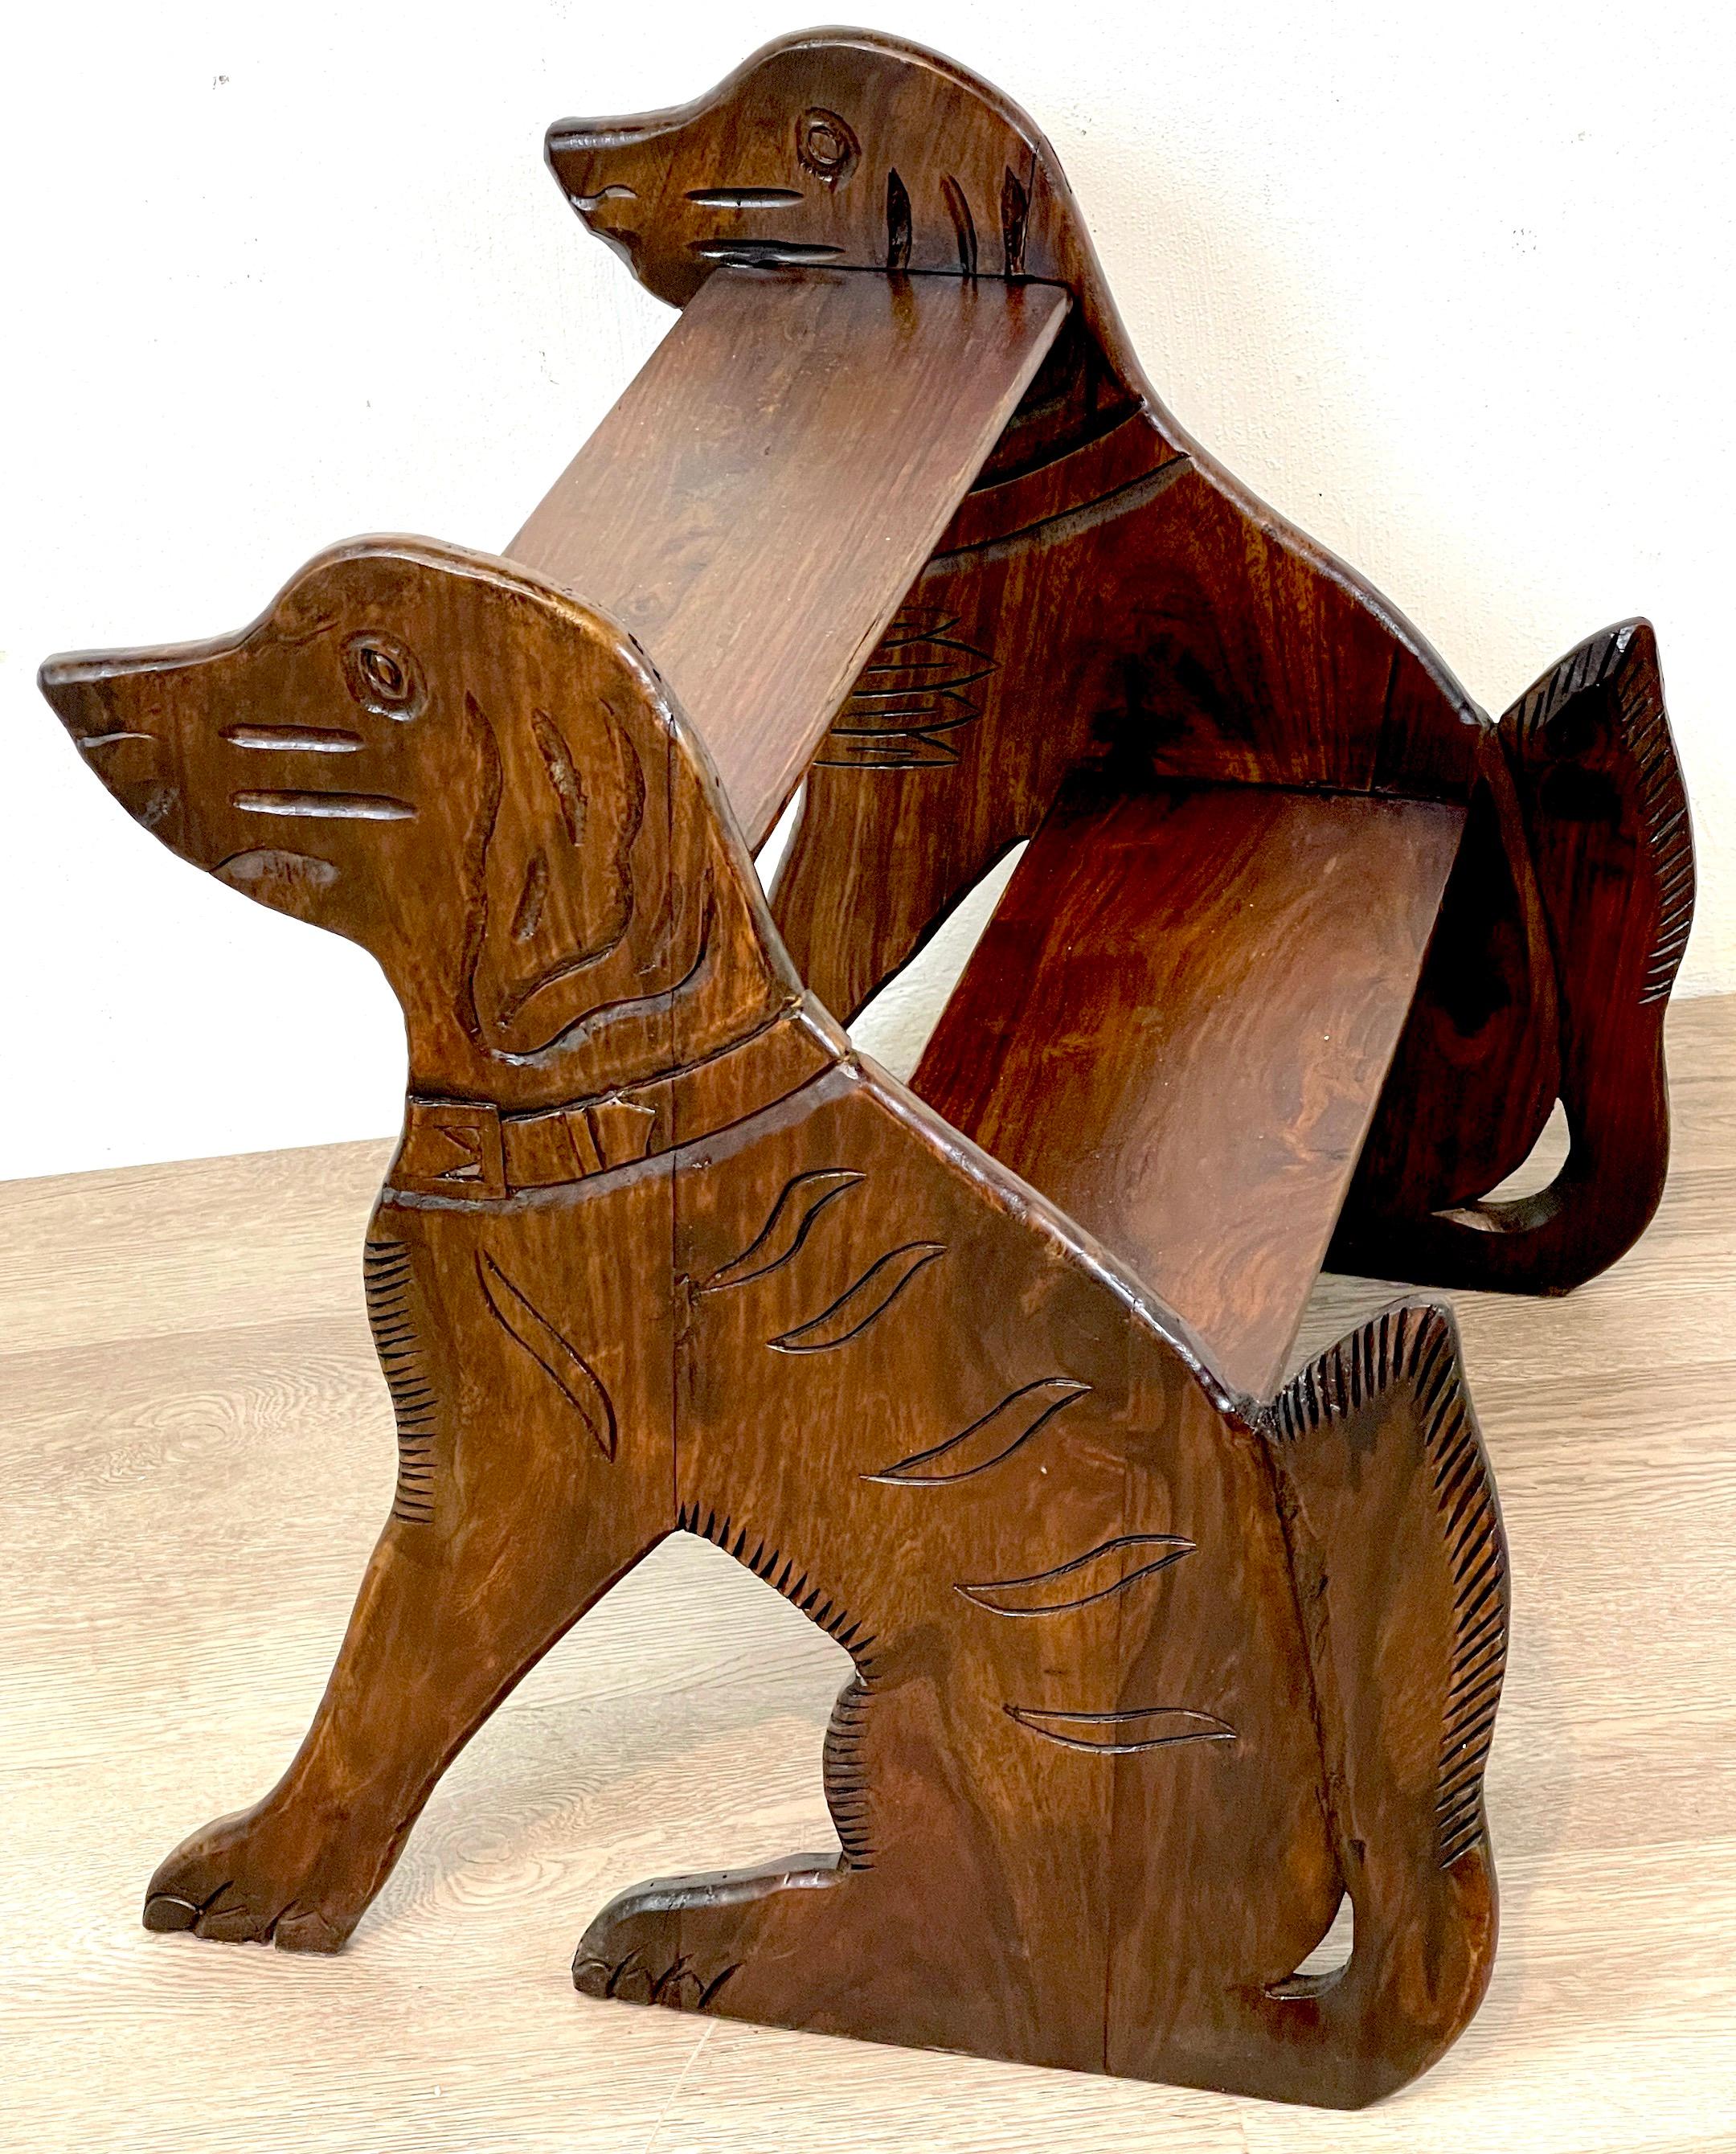 Diminutive antique English carved stained pine dog Motif Library Steps 
England, Circa 1890s/Early 1900s
A whimsical set of carved and incised English Victorian seated dog ( Possibly a Labrador/ English Hunting Hound) motif library steps, of good